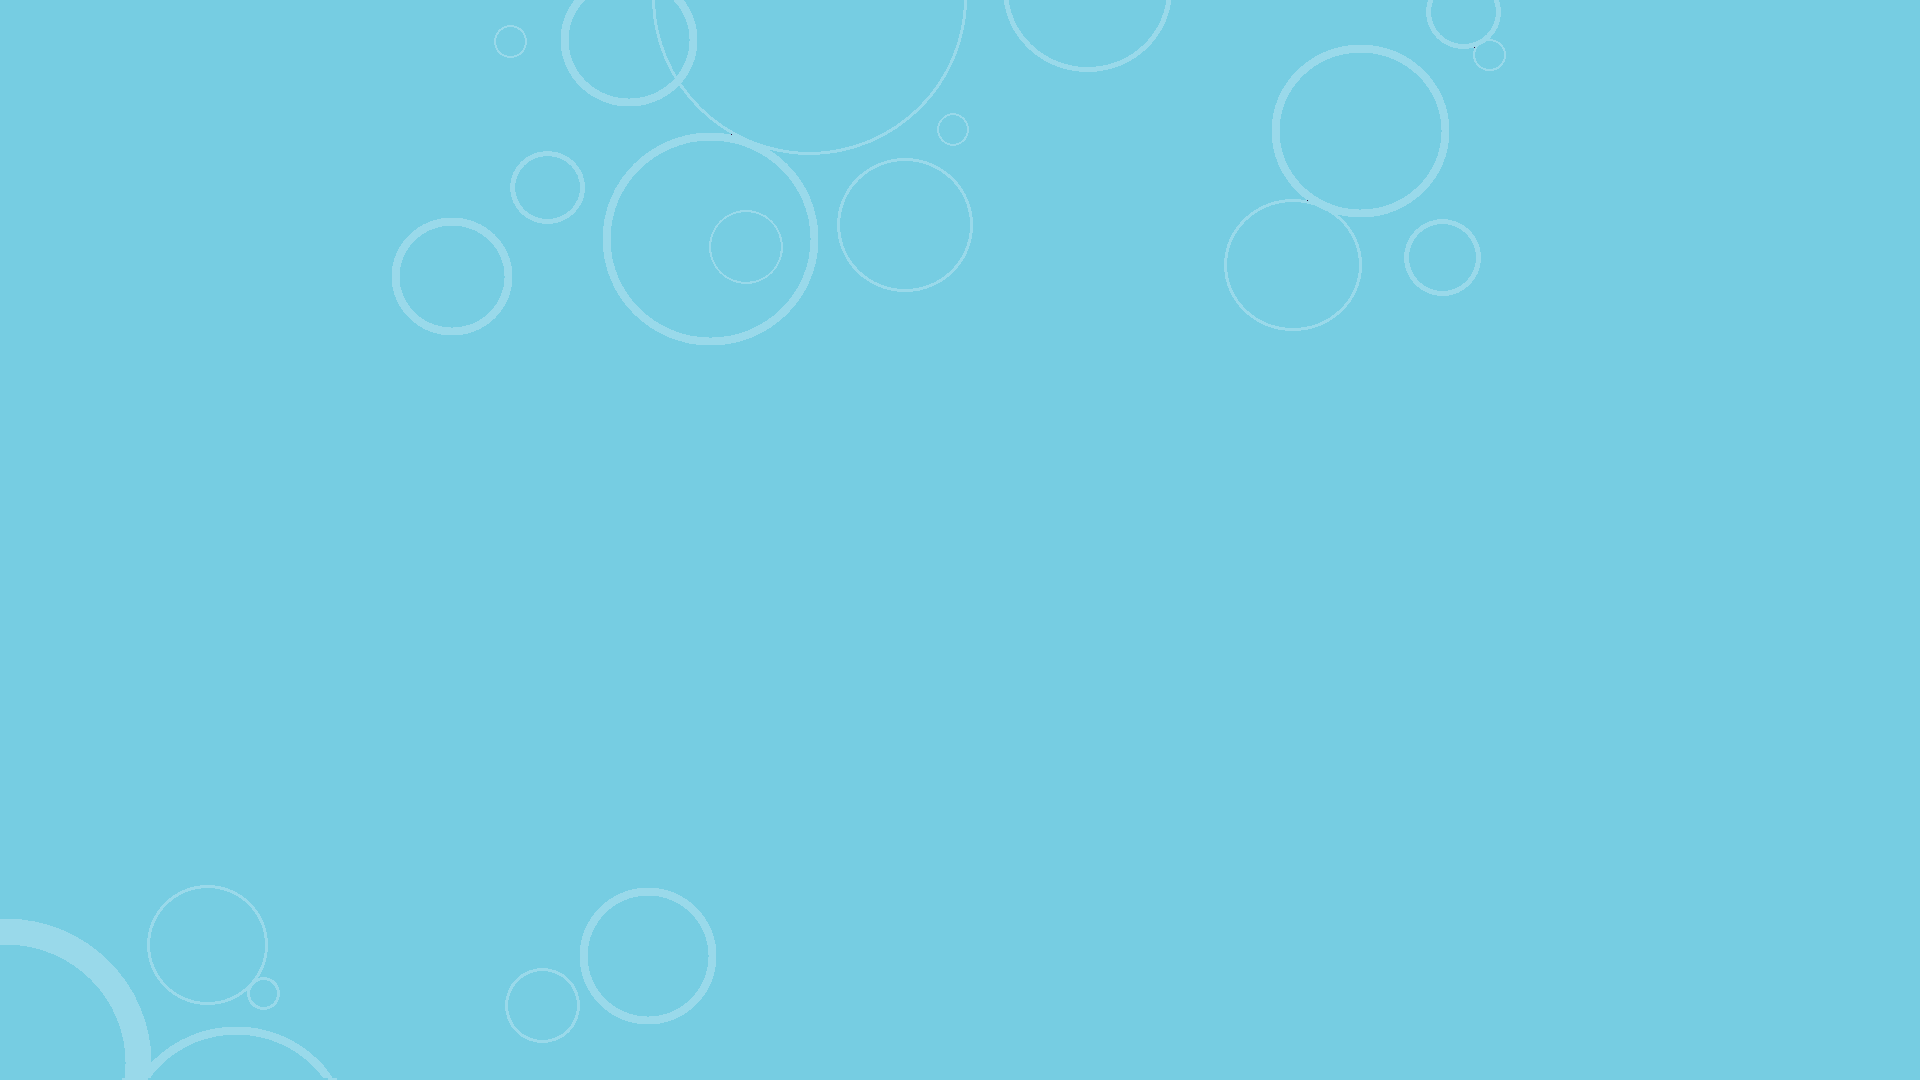 Light Blue Windows Bubbles Background By Gifteddeviant